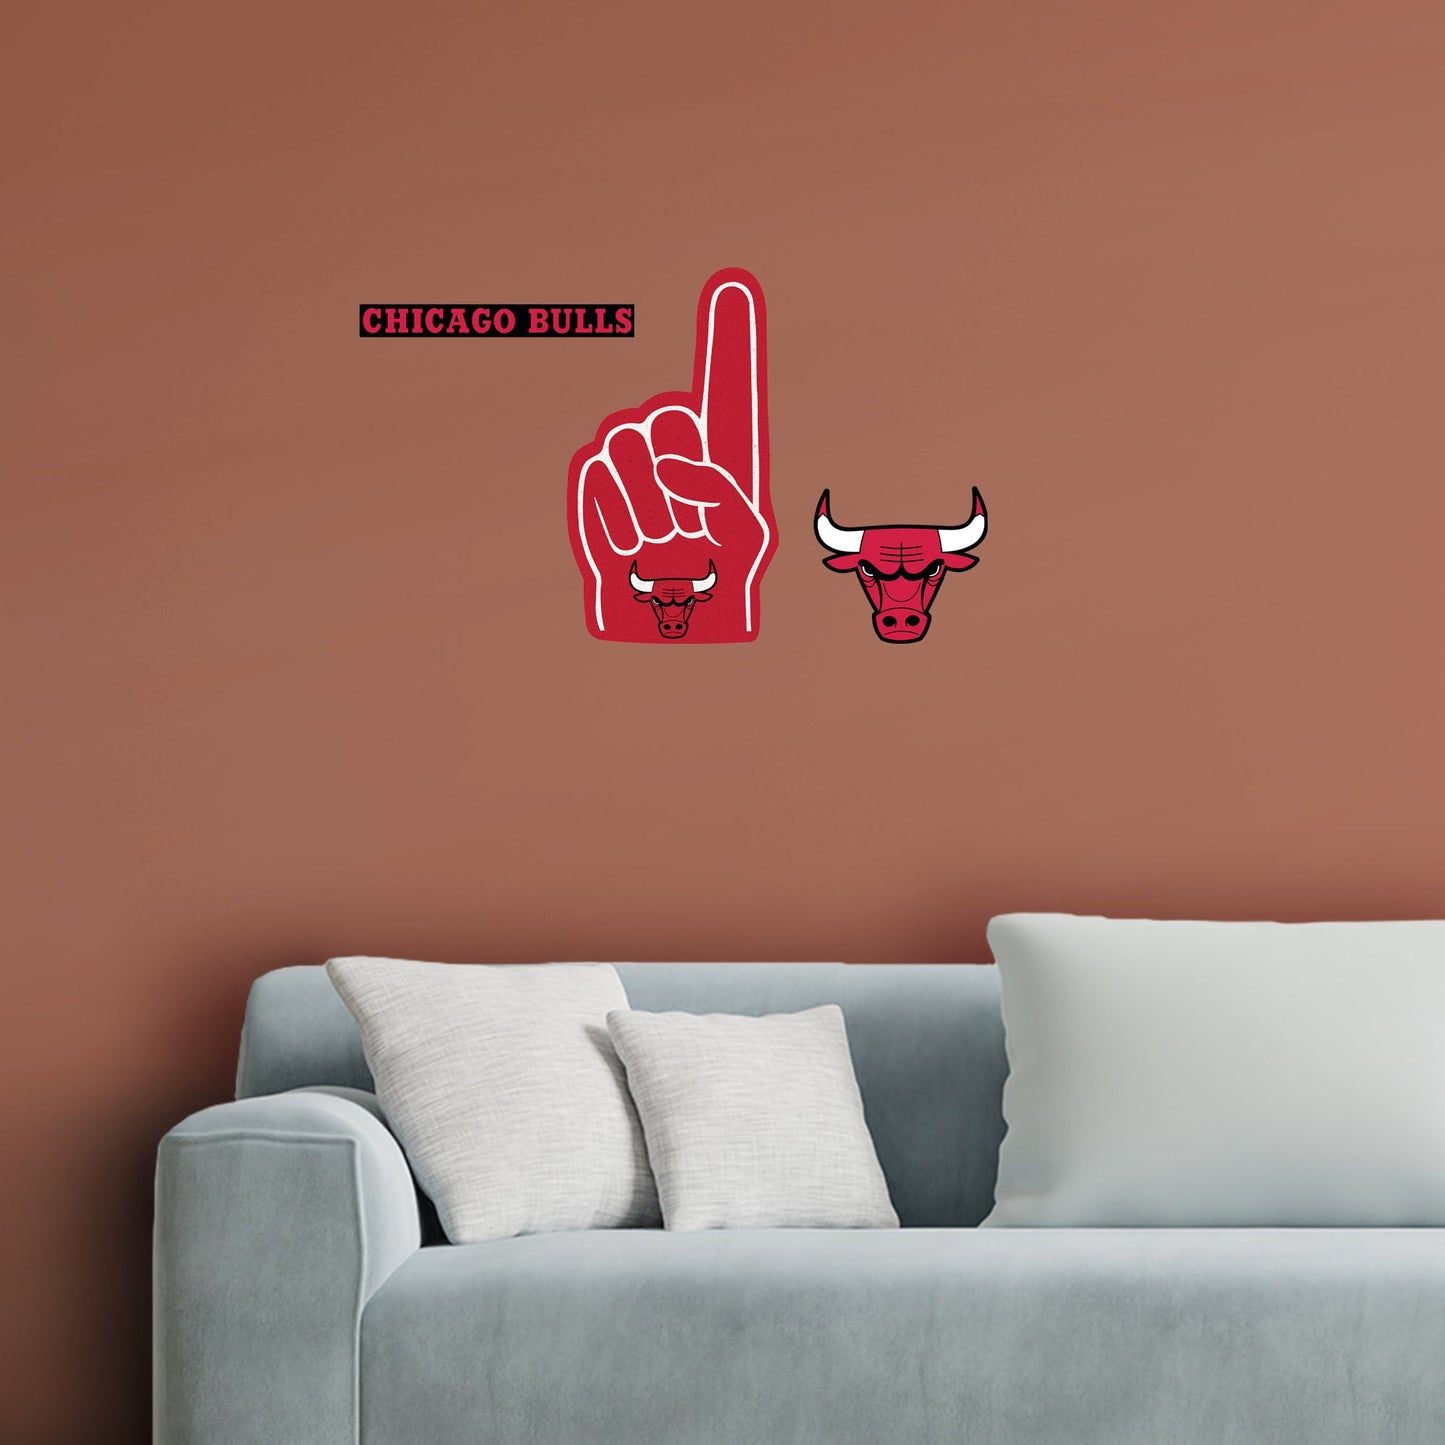 Chicago Bulls: Foam Finger - Officially Licensed NBA Removable Adhesive Decal